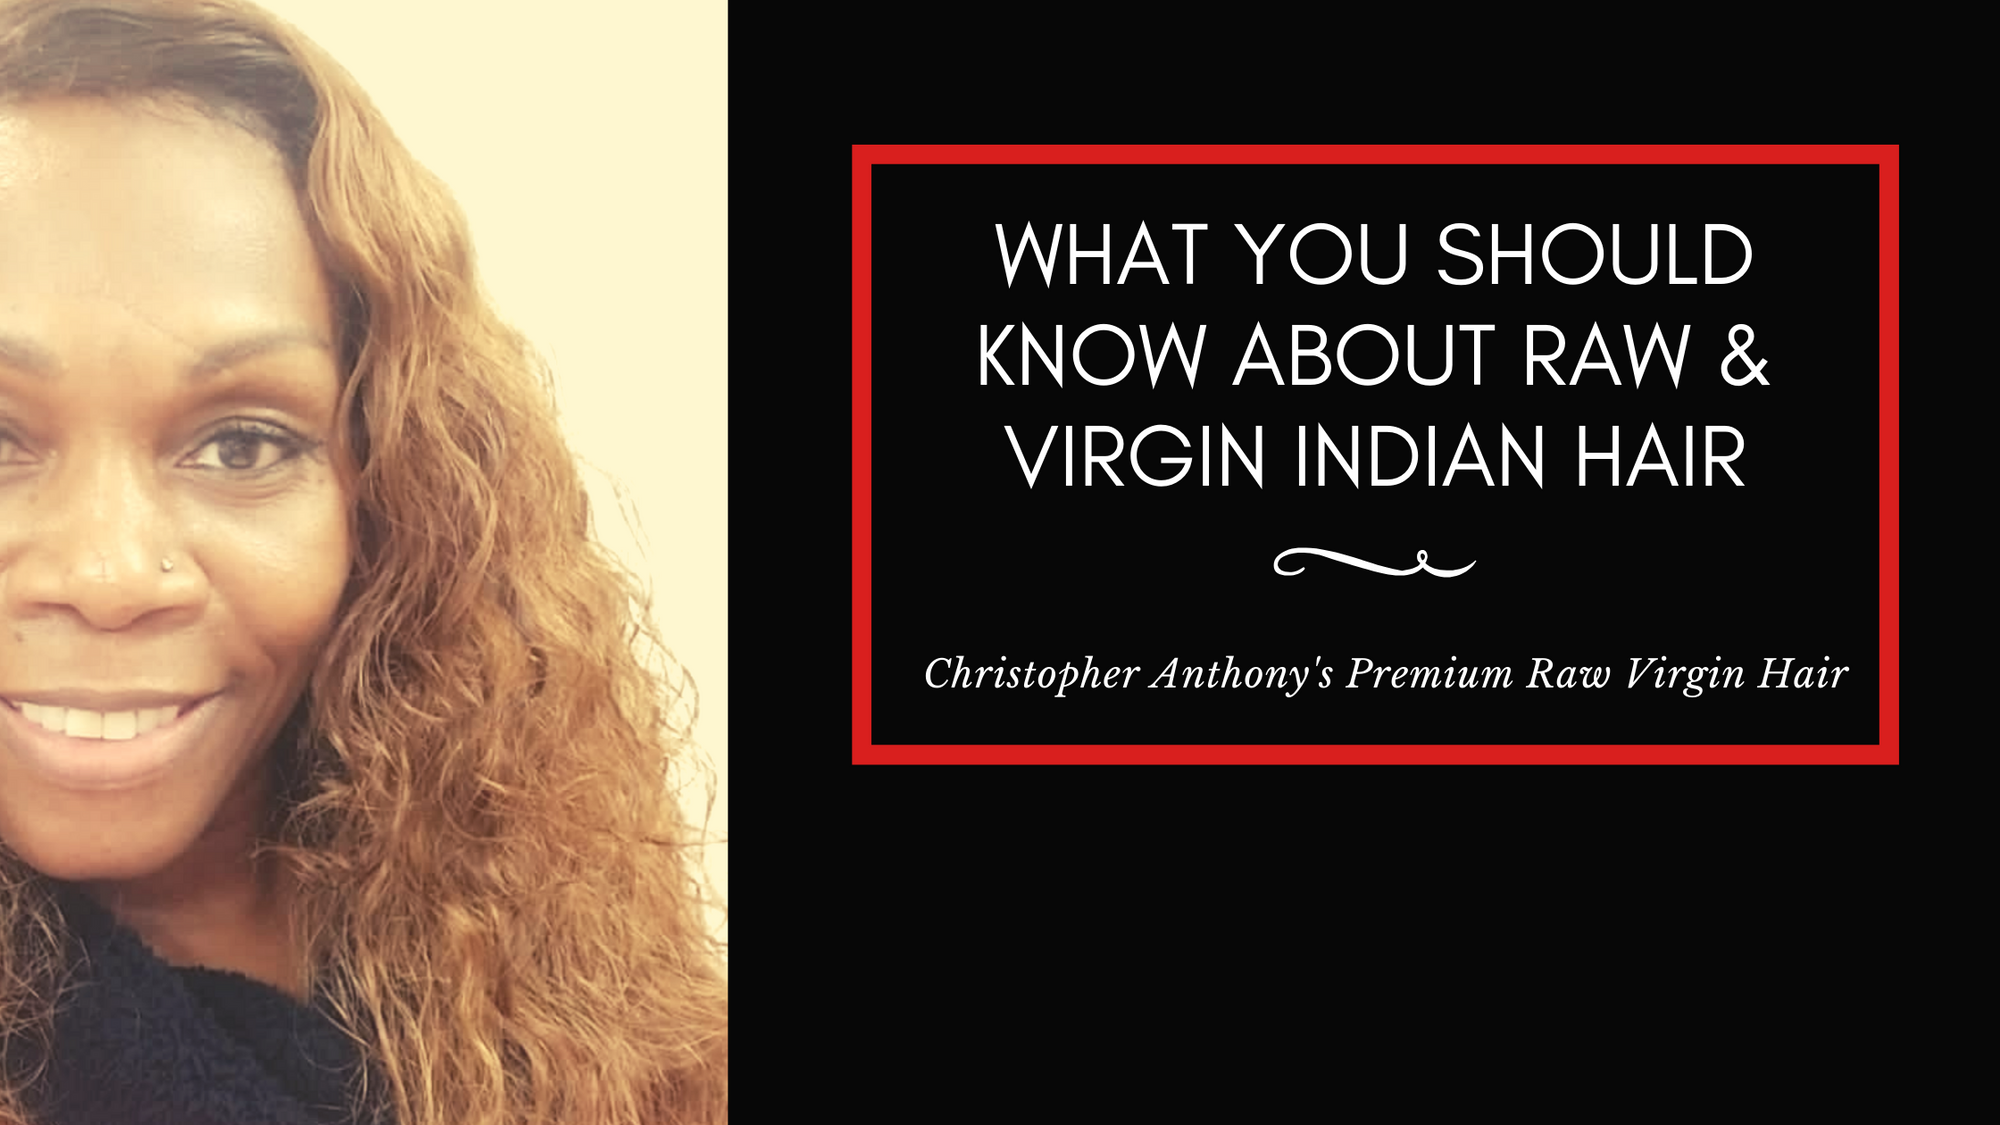 What You Should Know About Raw & Virgin Indian Hair